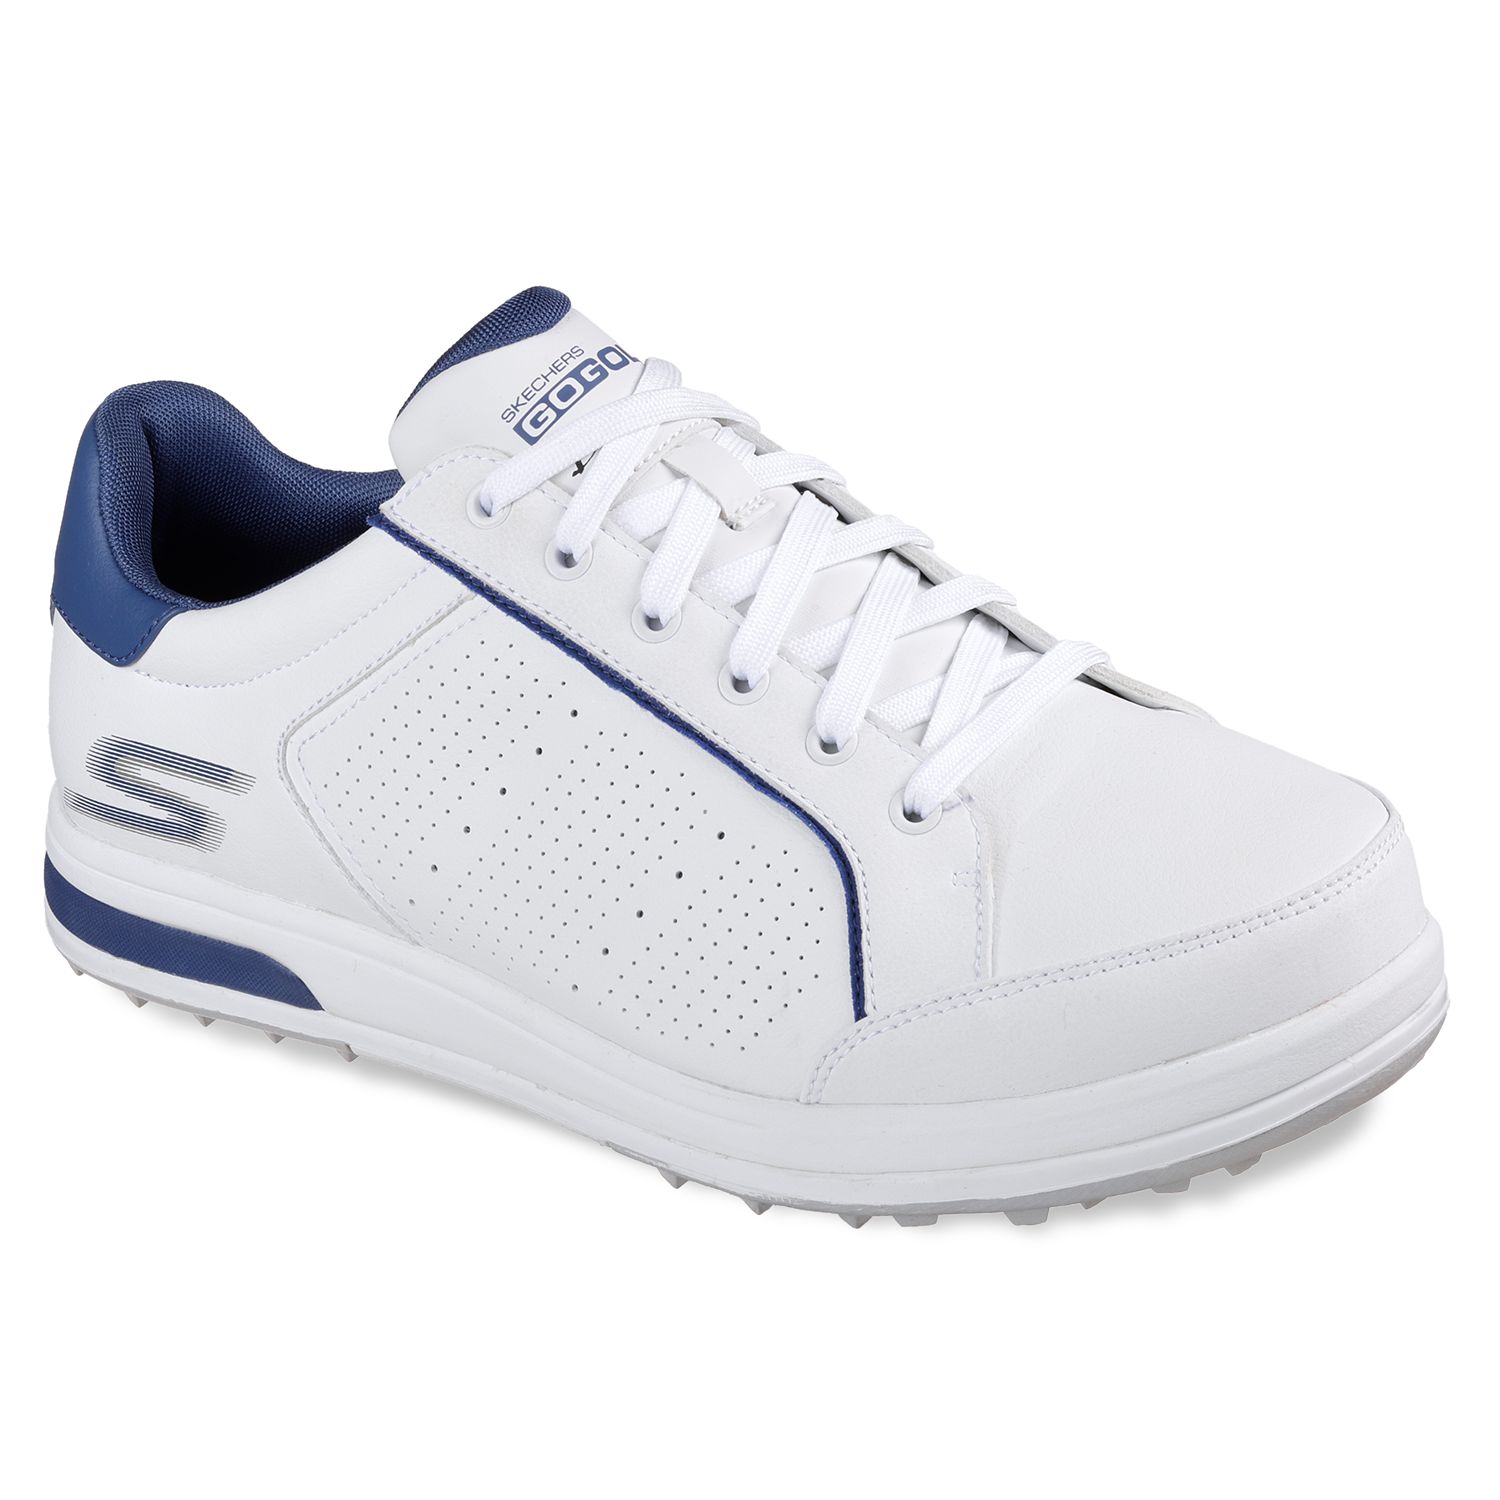 skechers wide relaxed fit golf shoes